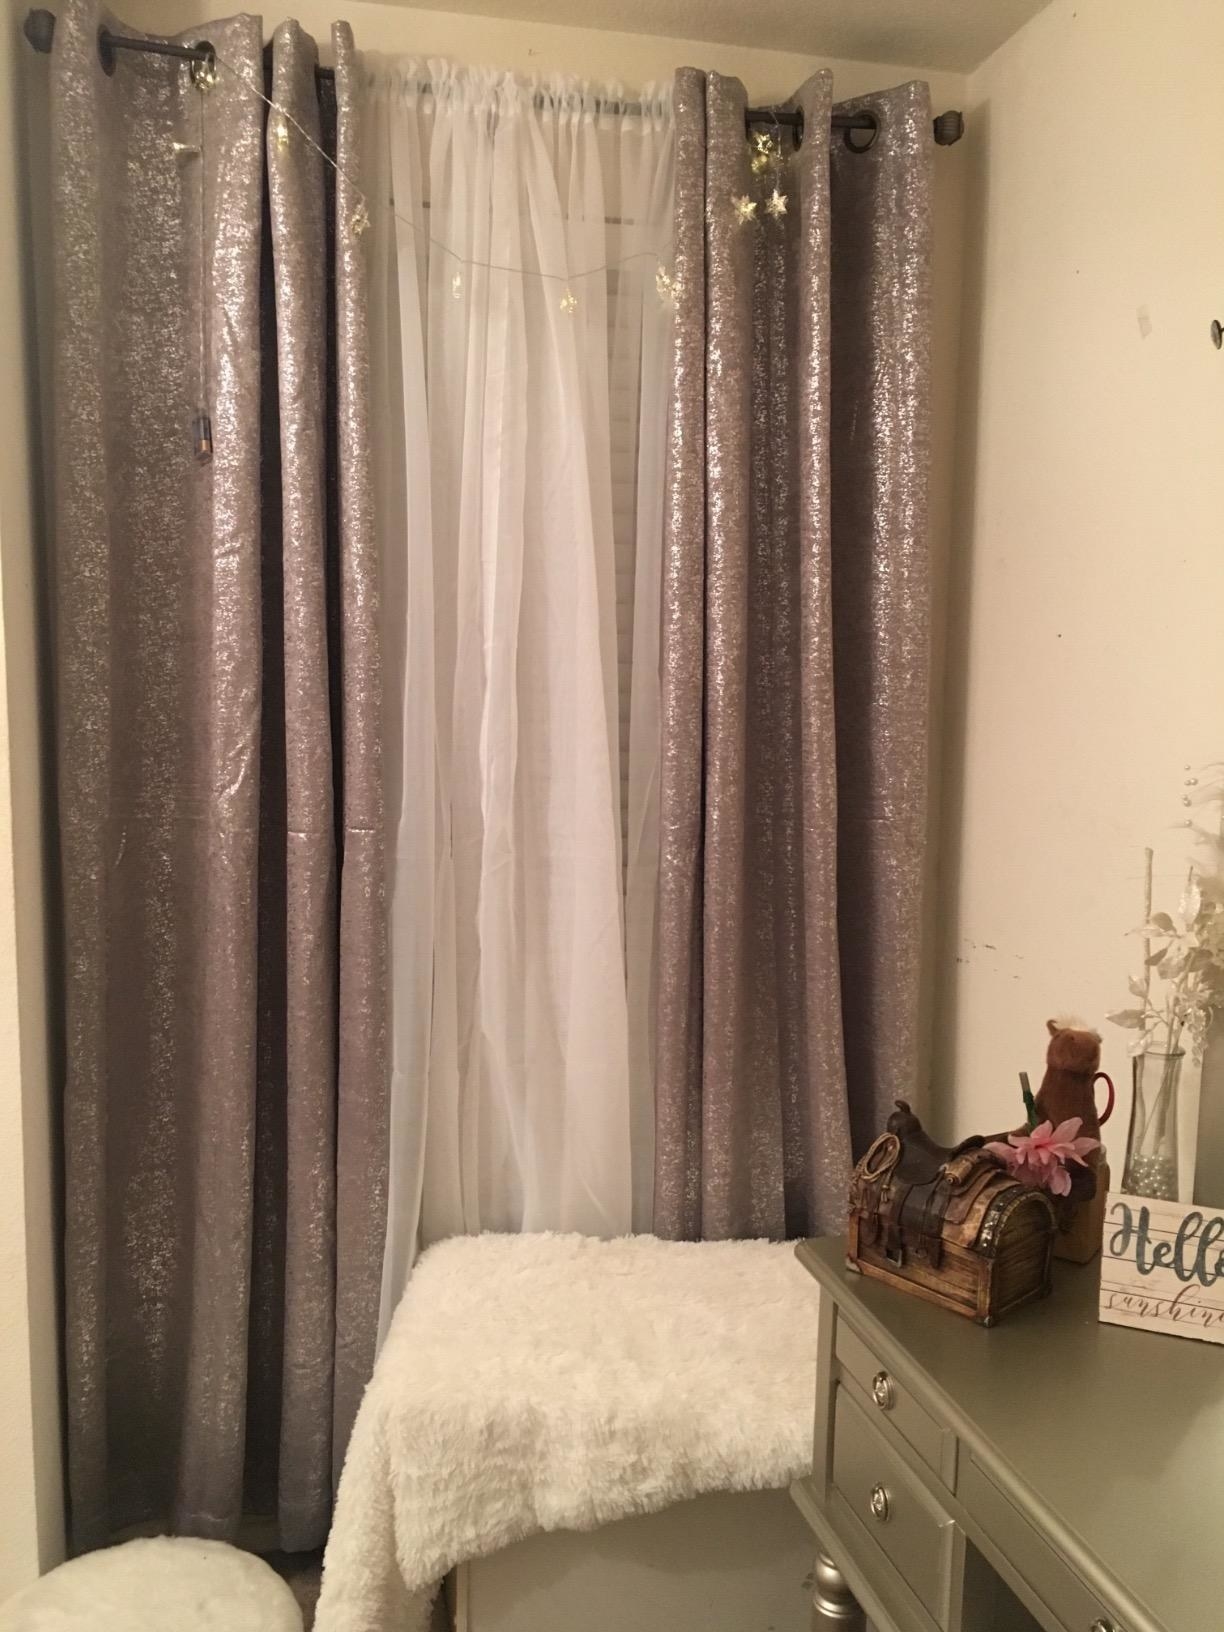 A reviewer photo of the curtains in silver